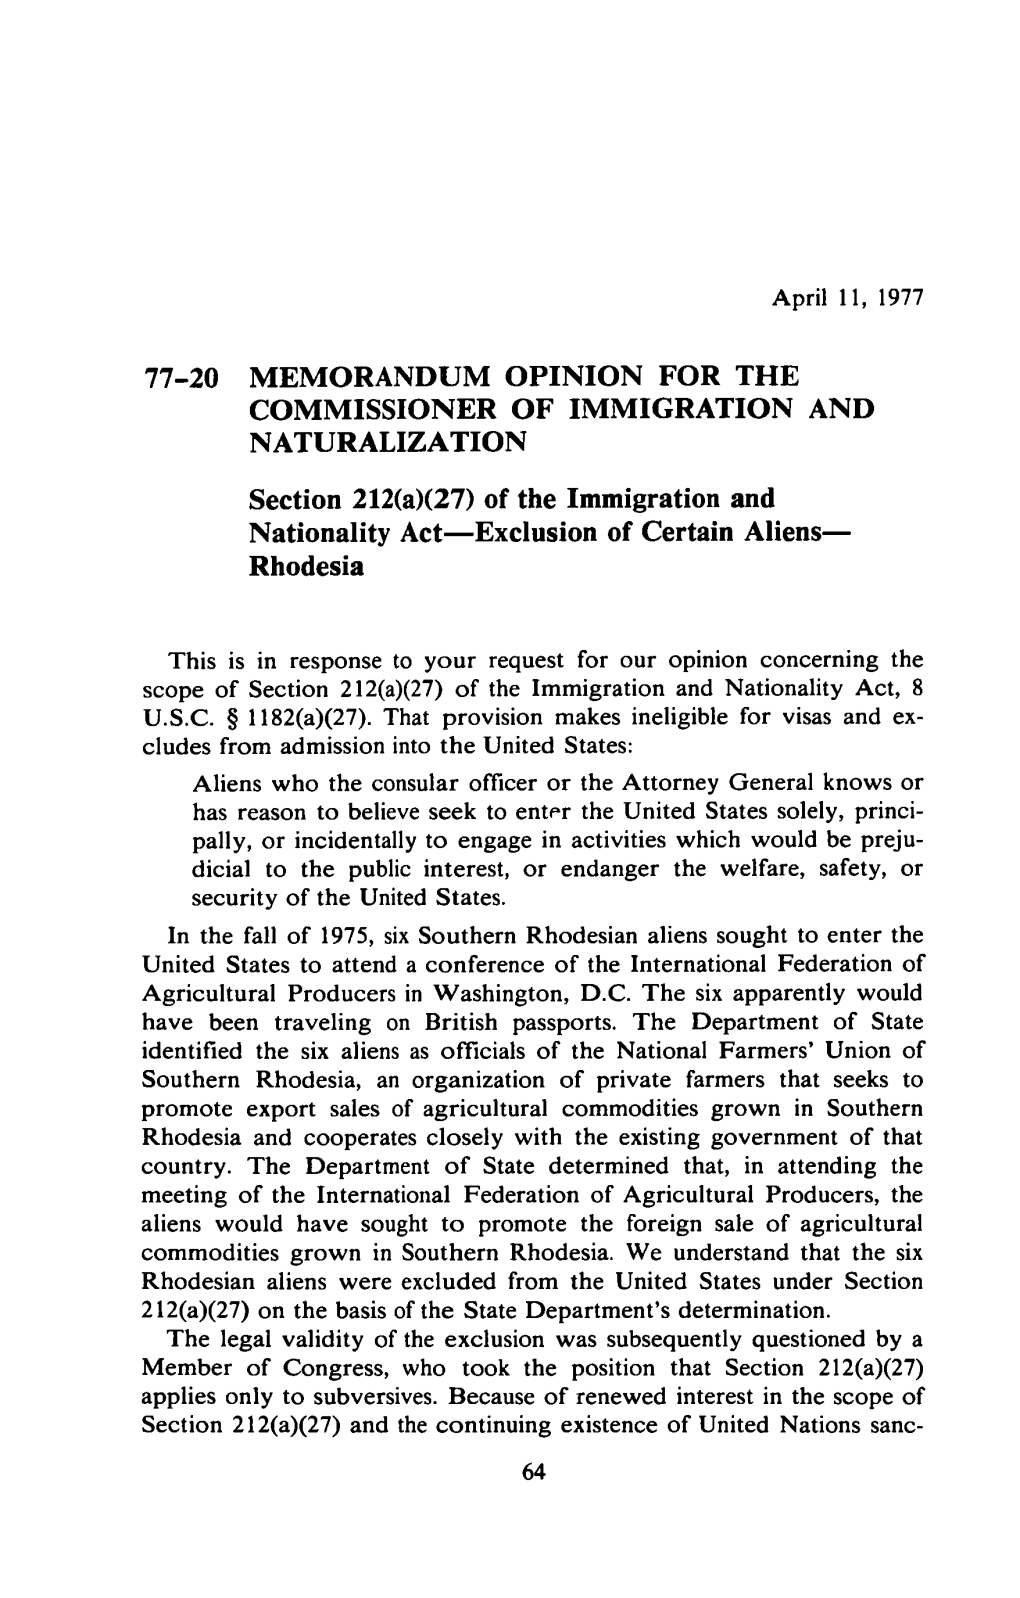 Of the Immigration and Nationality Act—Exclusion of Certain Aliens— Rhodesia